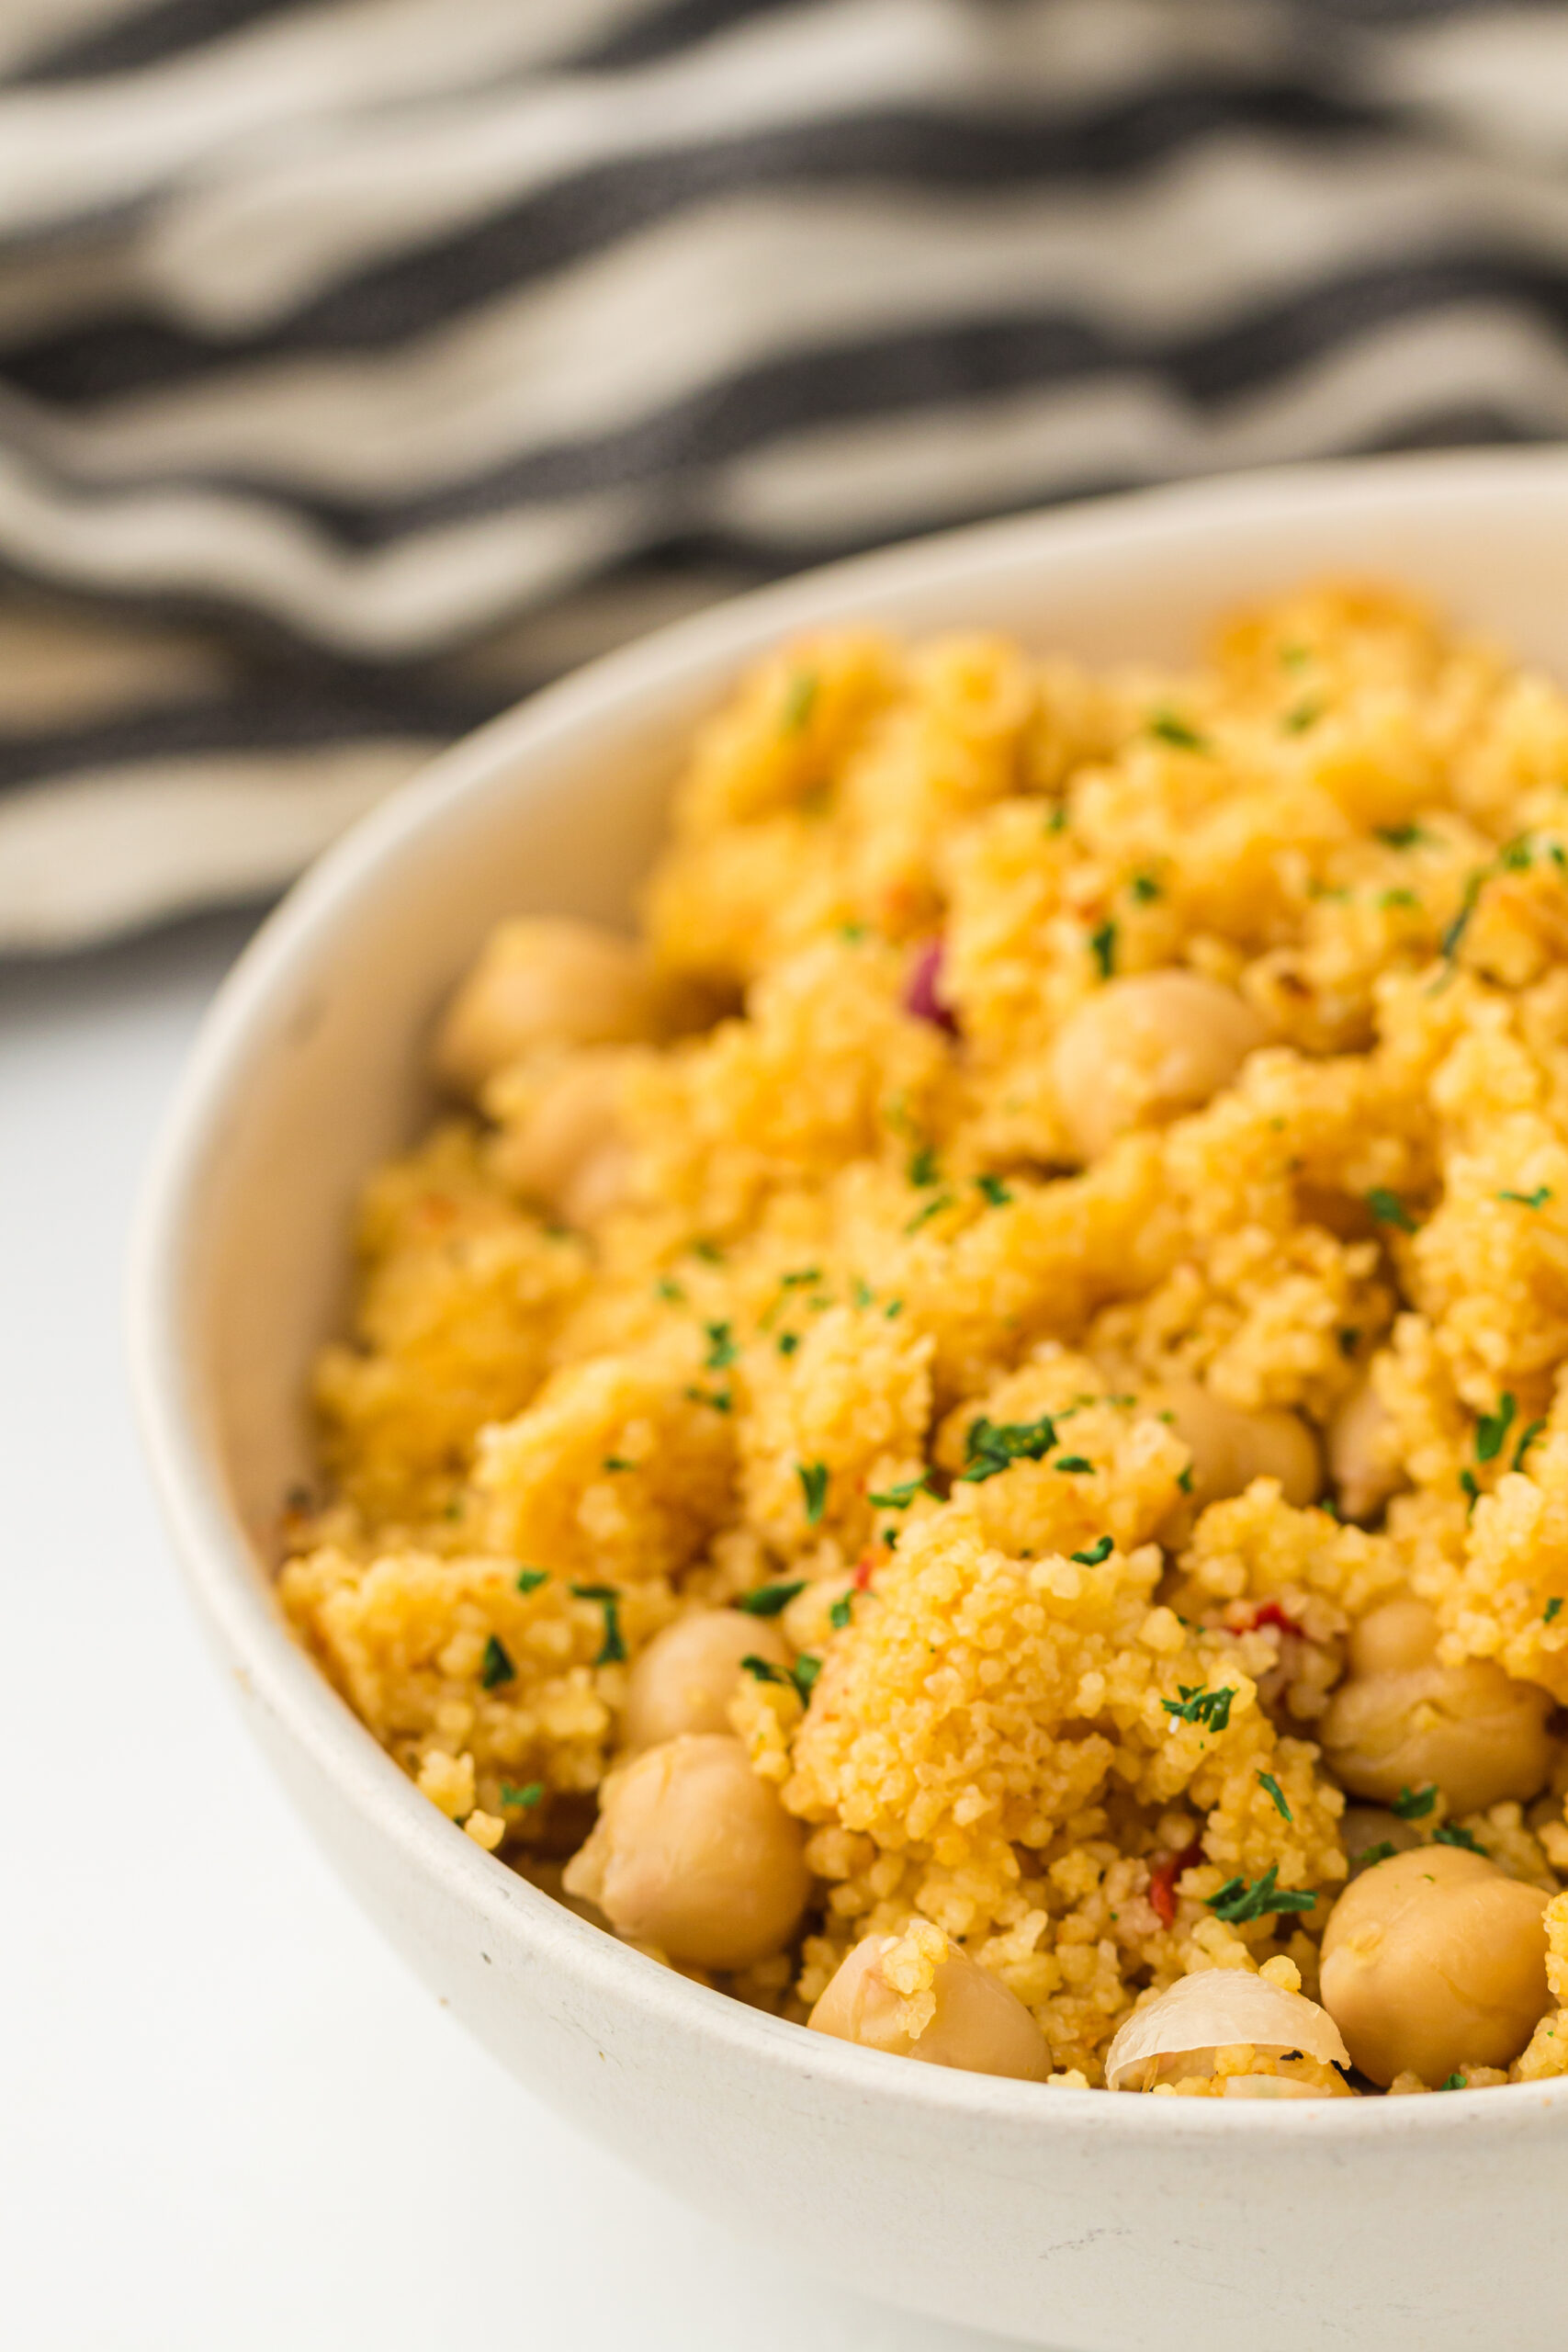 Flavorful Mediterranean Couscous and Chickpeas Recipe